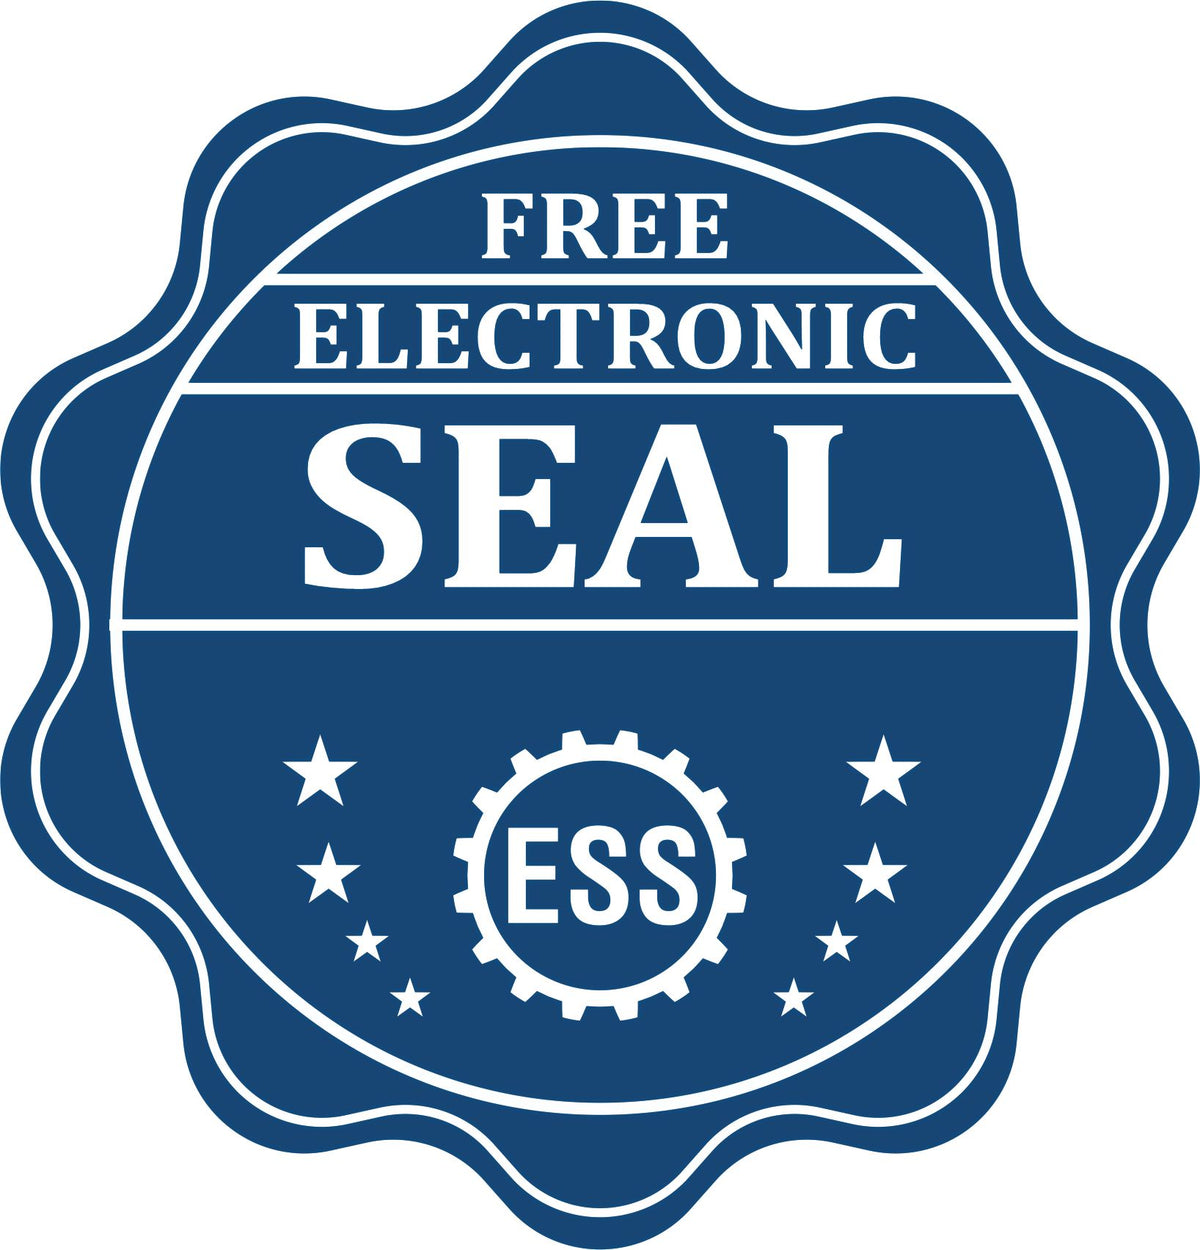 A badge showing a free electronic seal for the Slim Pre-Inked State Seal Notary Stamp for Kansas with stars and the ESS gear on the emblem.